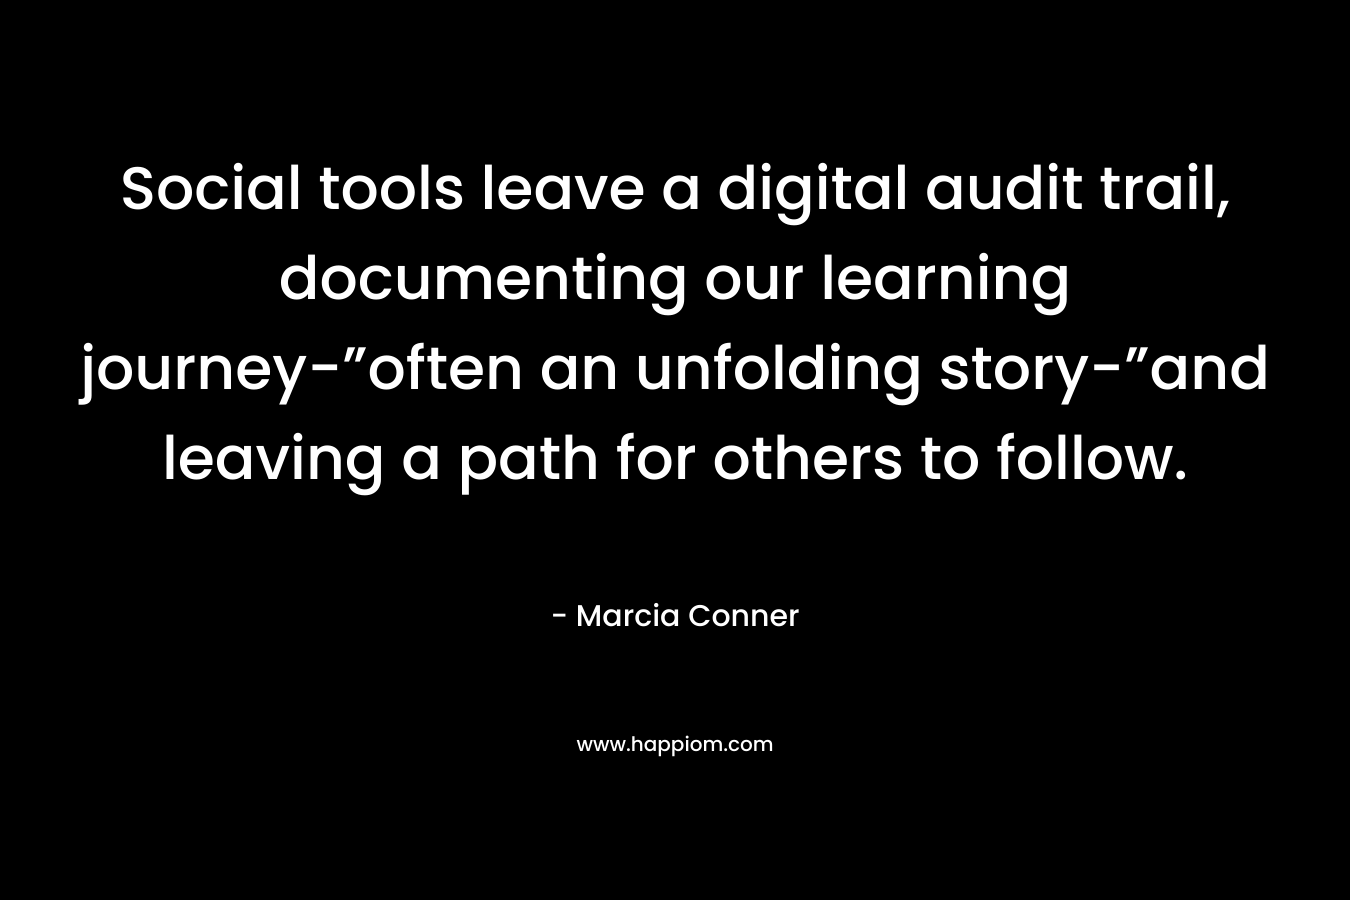 Social tools leave a digital audit trail, documenting our learning journey-”often an unfolding story-”and leaving a path for others to follow. – Marcia Conner